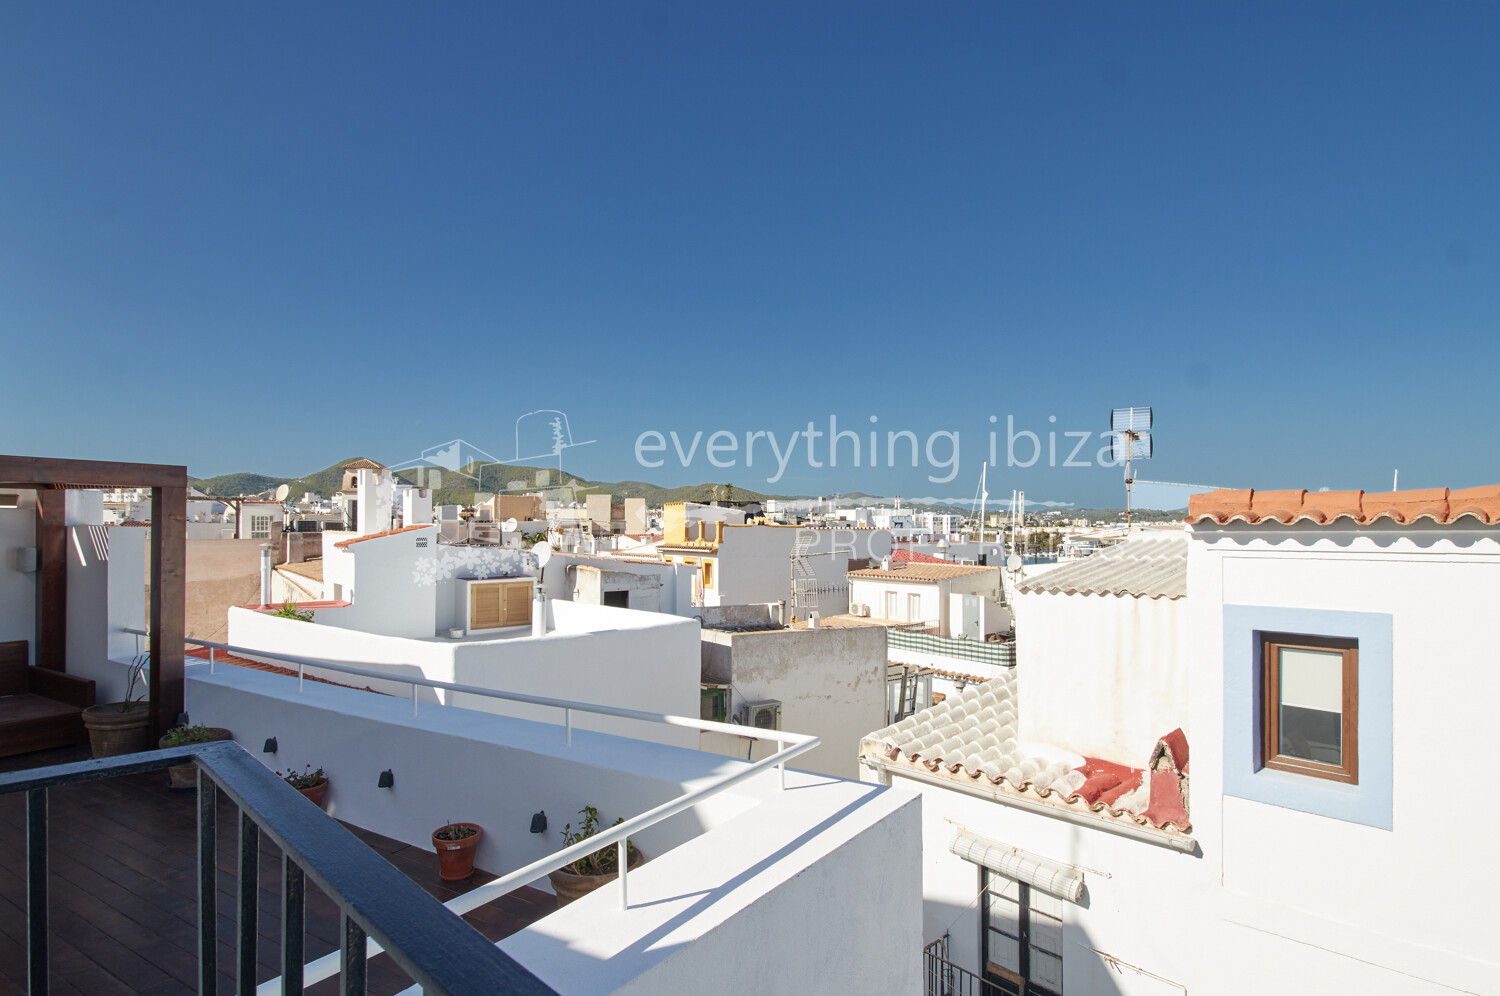 Beautifully Restored Duplex with 360º Views in the Heart of Old Ibiza Town, ref. 1679, for sale in Ibiza by everything ibiza Properties